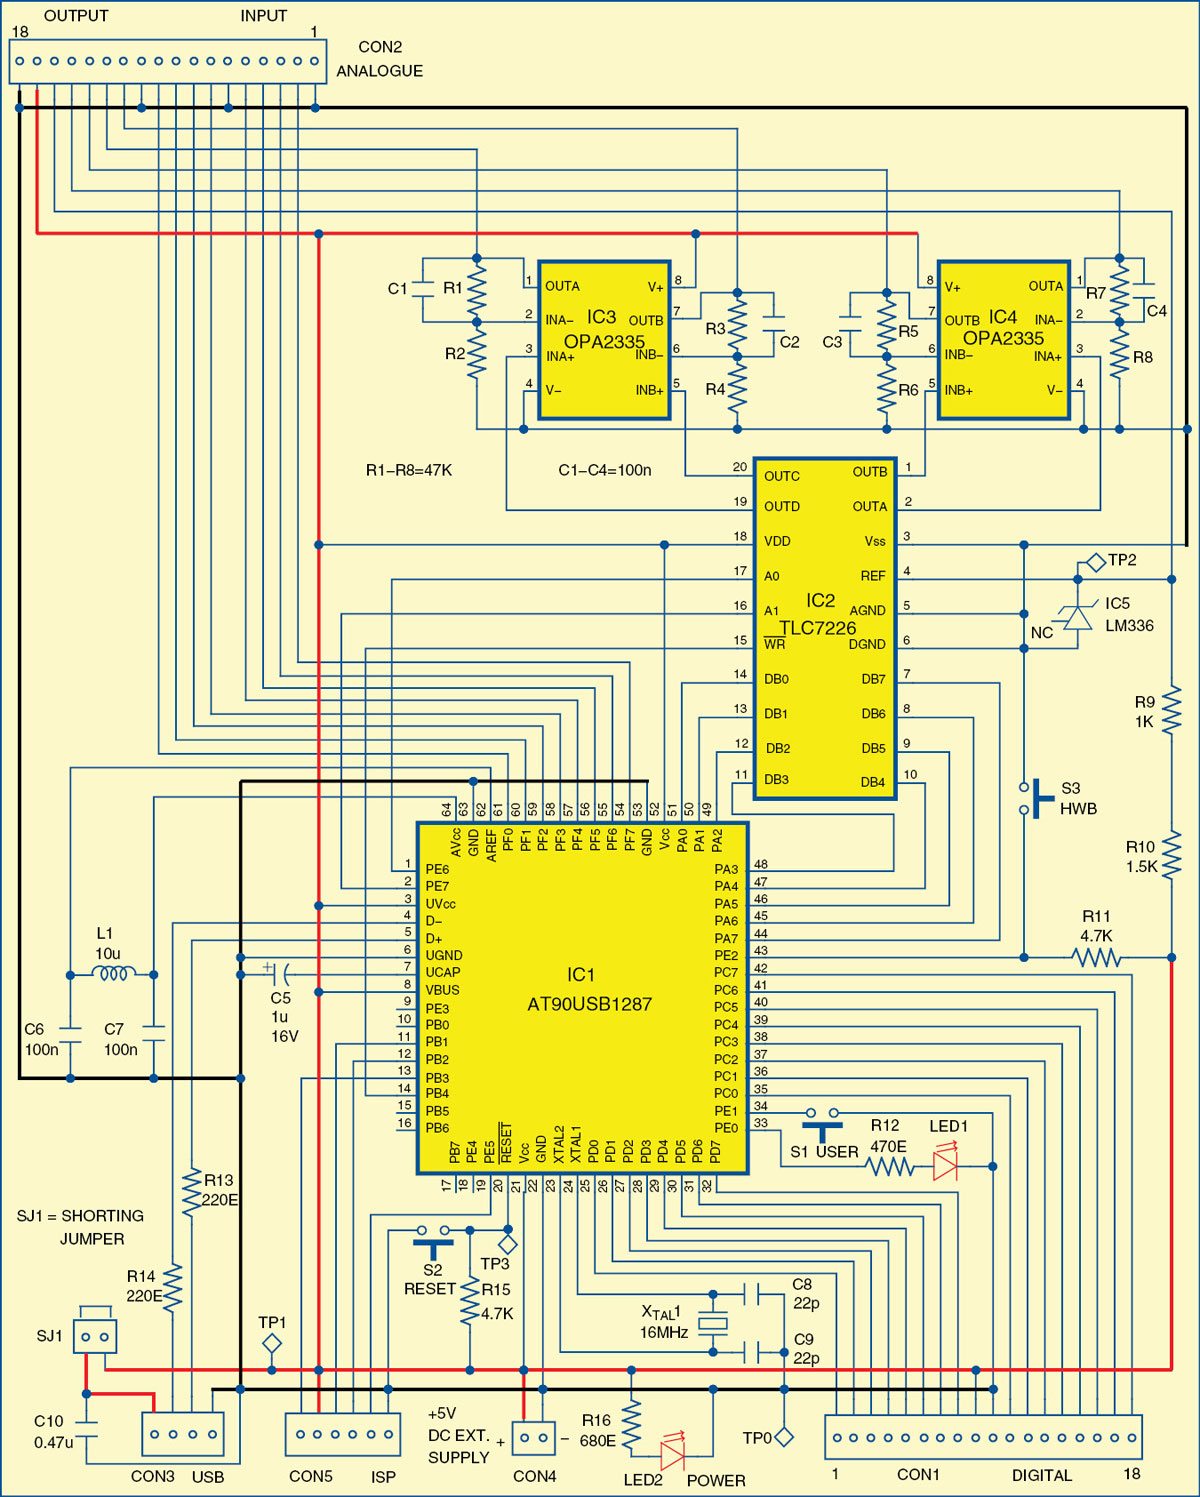 Fig. 2: Circuit of USB data acquisition system